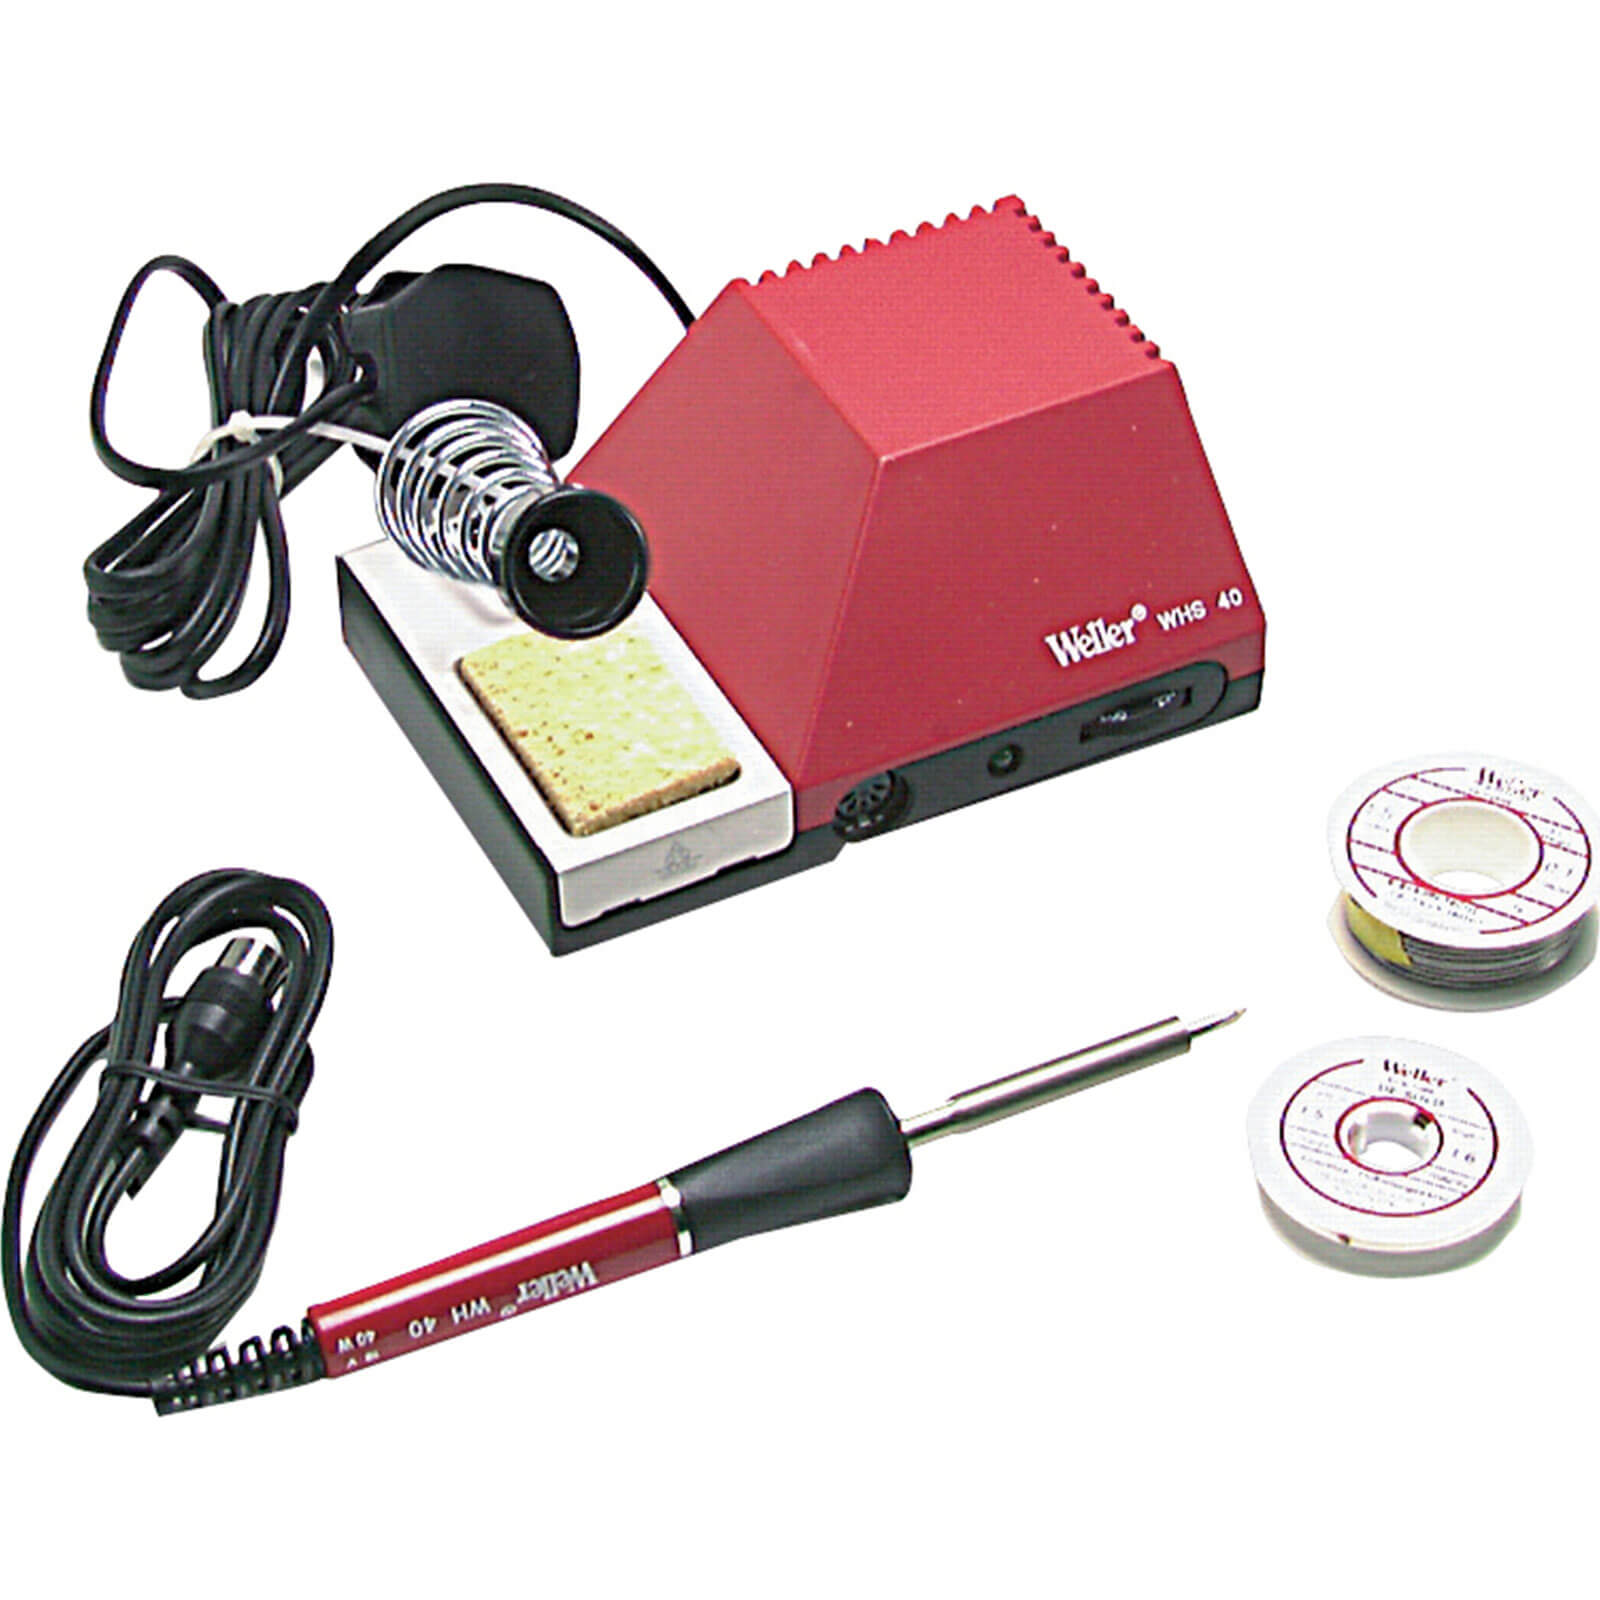 Photo of Weller Whs40 Temperature Controlled Soldering Station 40 Watts